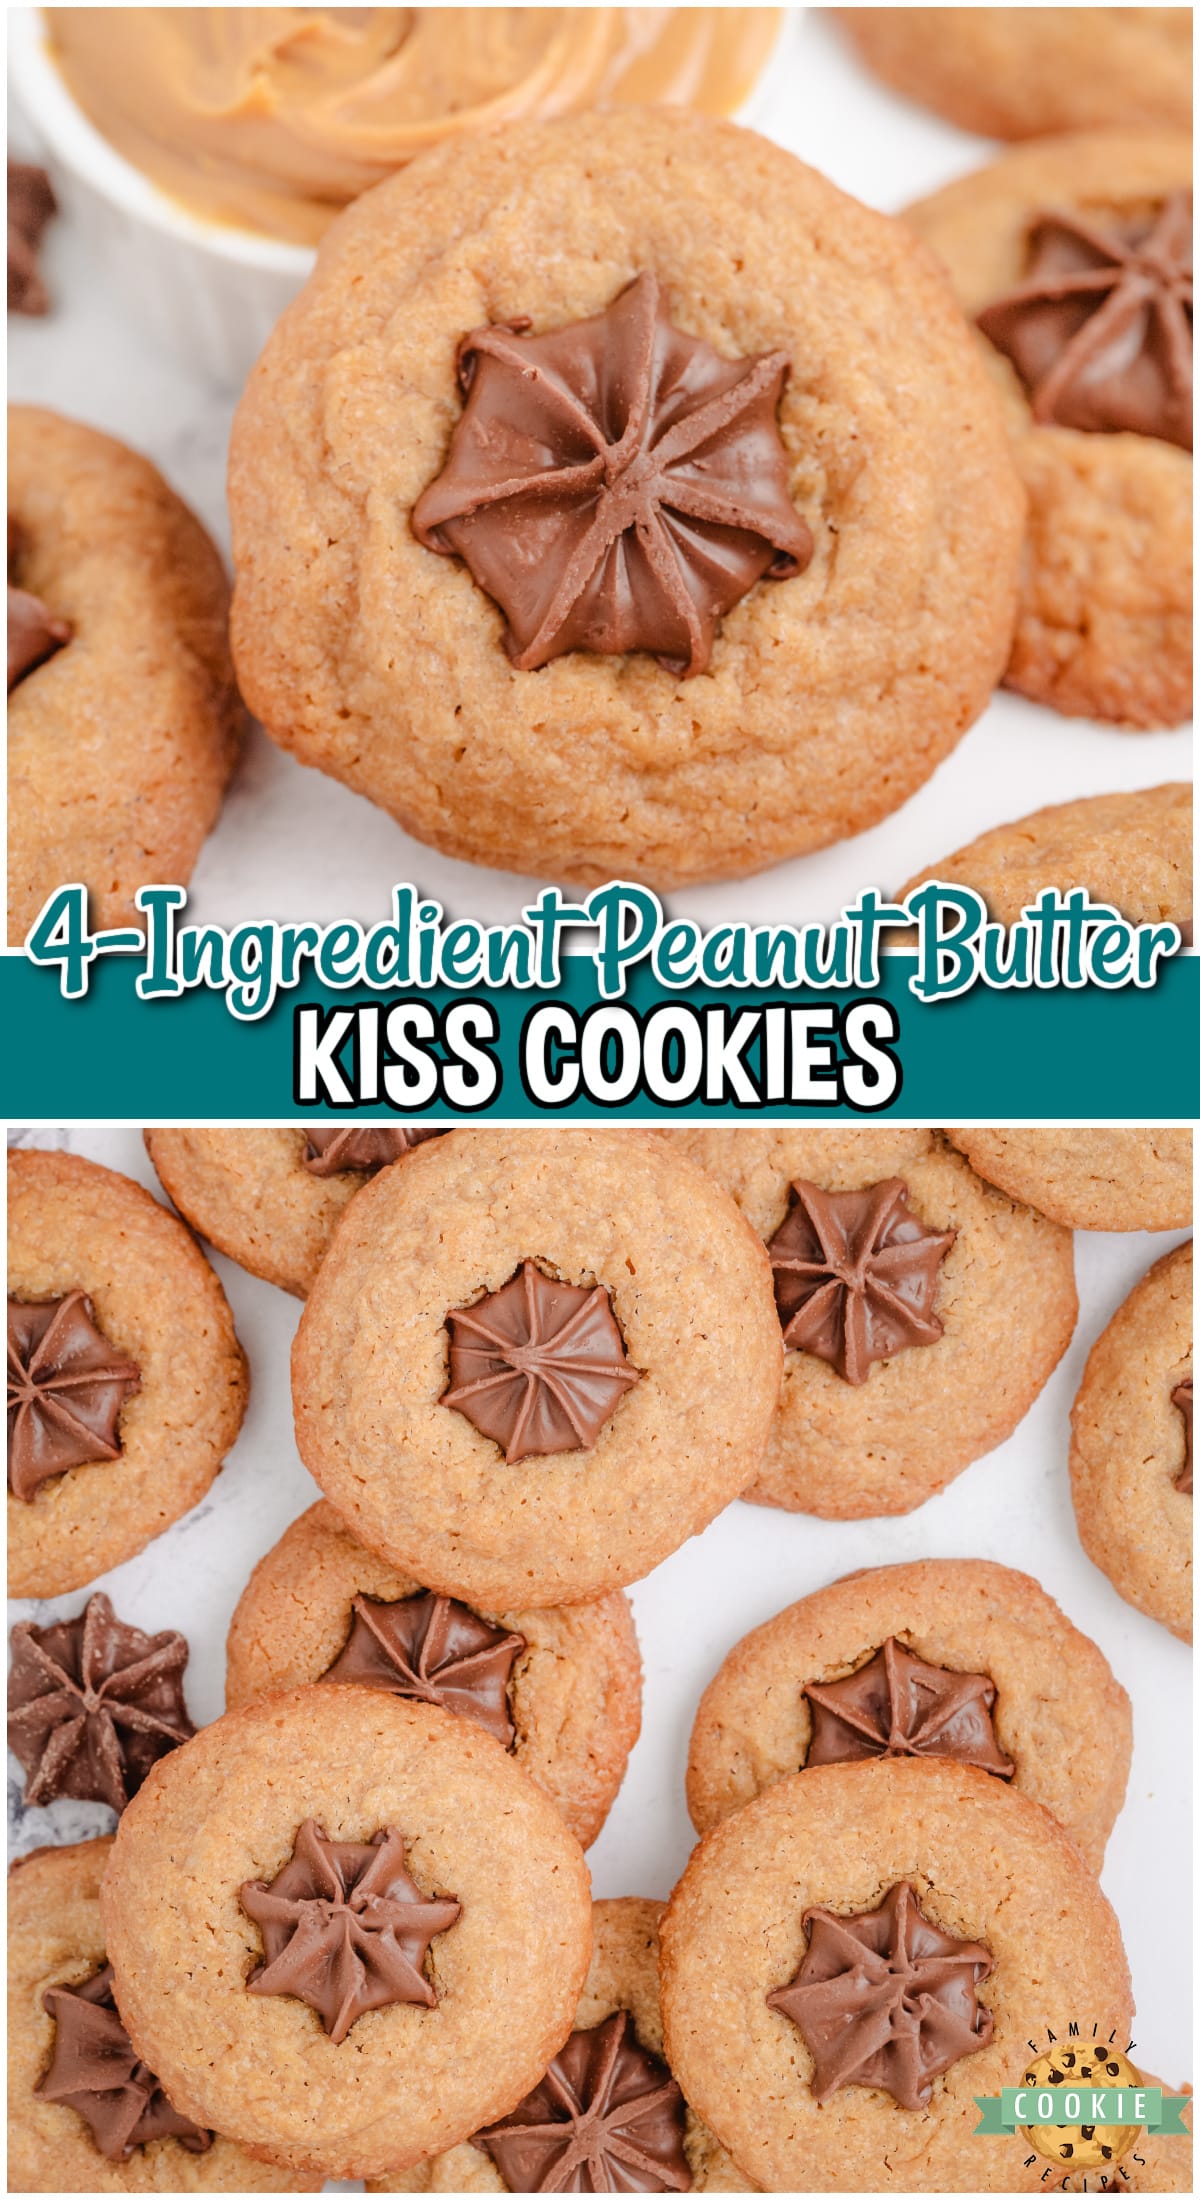 Easy Peanut Butter Kiss Cookies are made with 4 simple ingredients: peanut butter, sugar, eggs & topped with star kisses! These Hershey kisses peanut butter cookies have a rich, nutty flavor with a sweet, chocolatey finish.